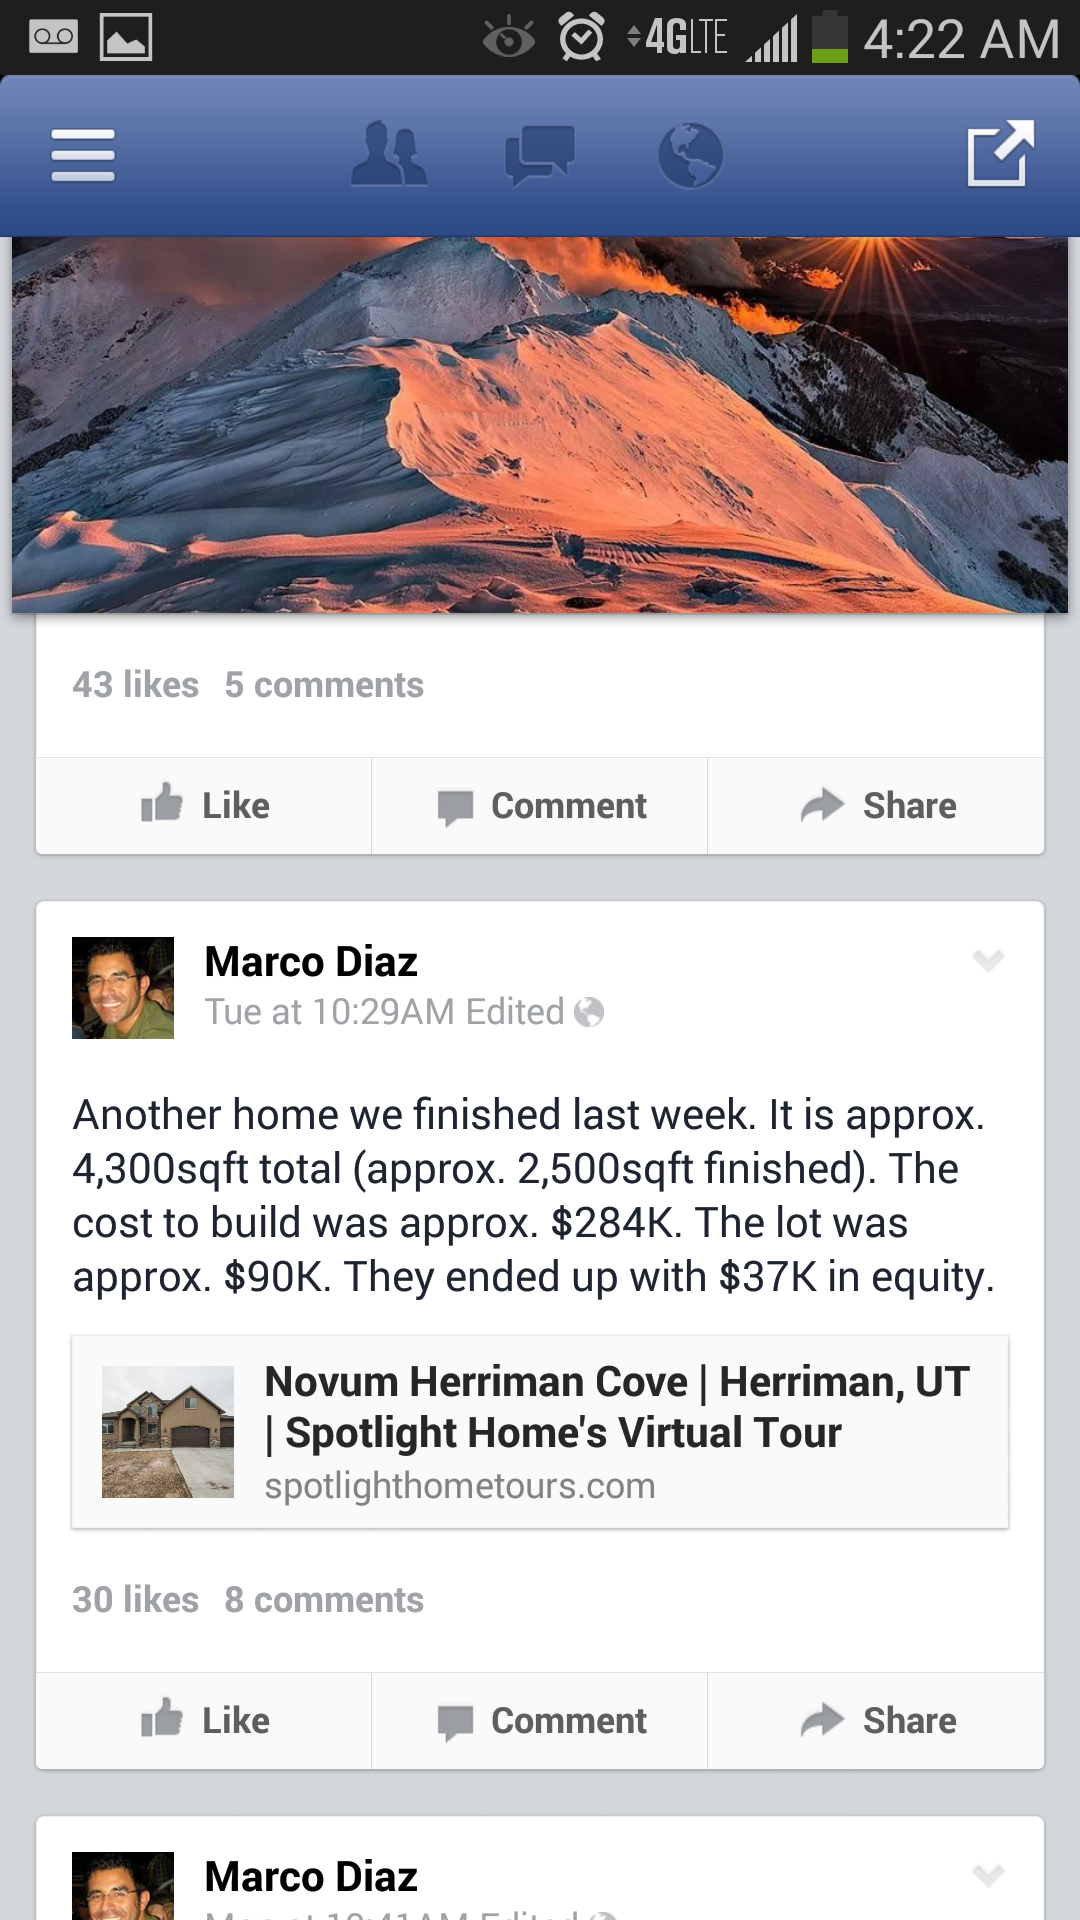 Marcos Diaz fb post about home that he just finished